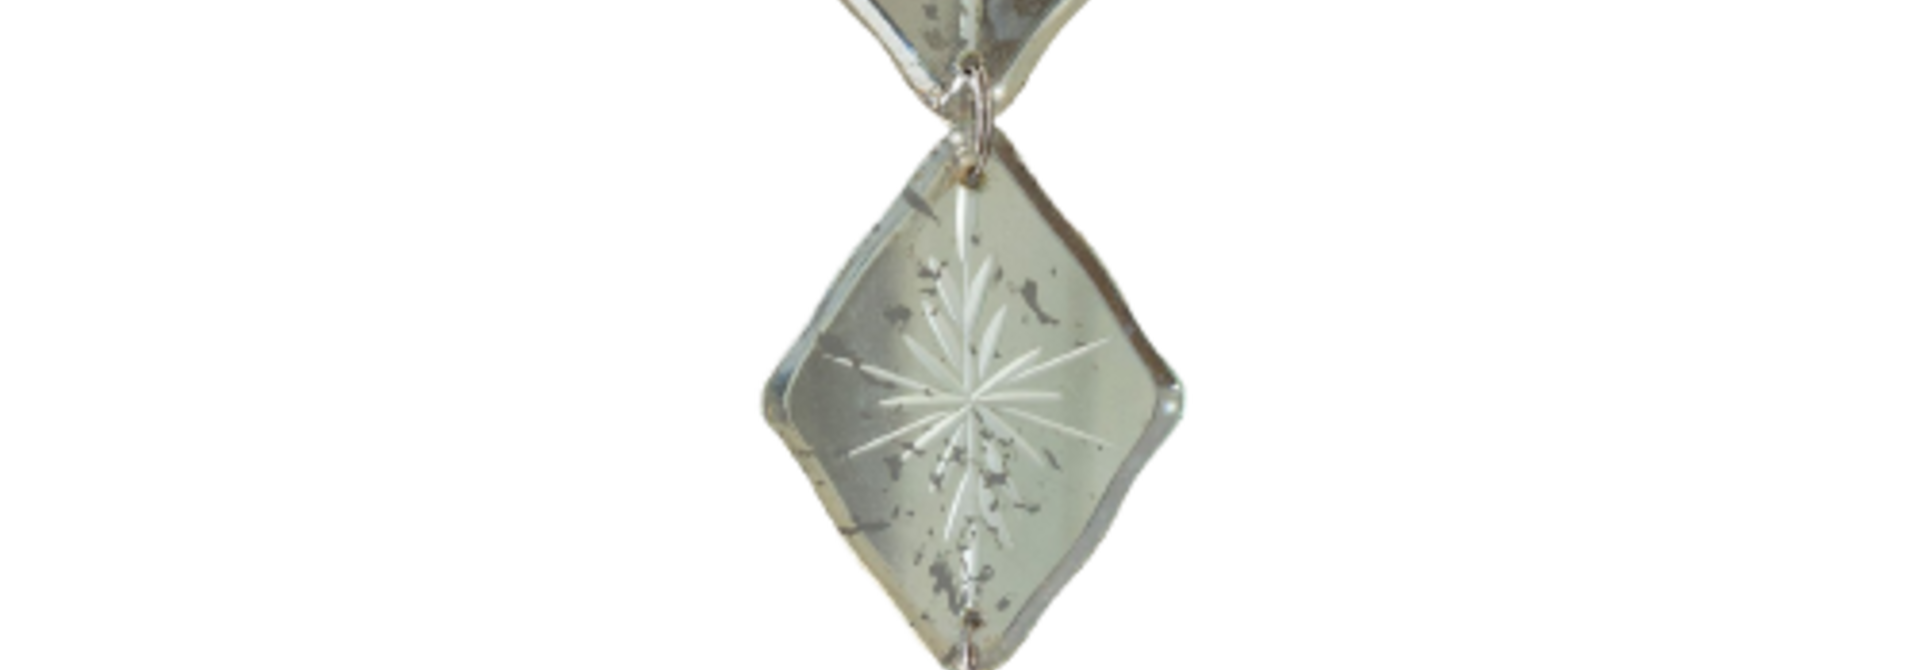 Antiqued Diamond Triple Snowflake | The Holiday Ornament Collection - 3.25 Inch x  10.25 Inch